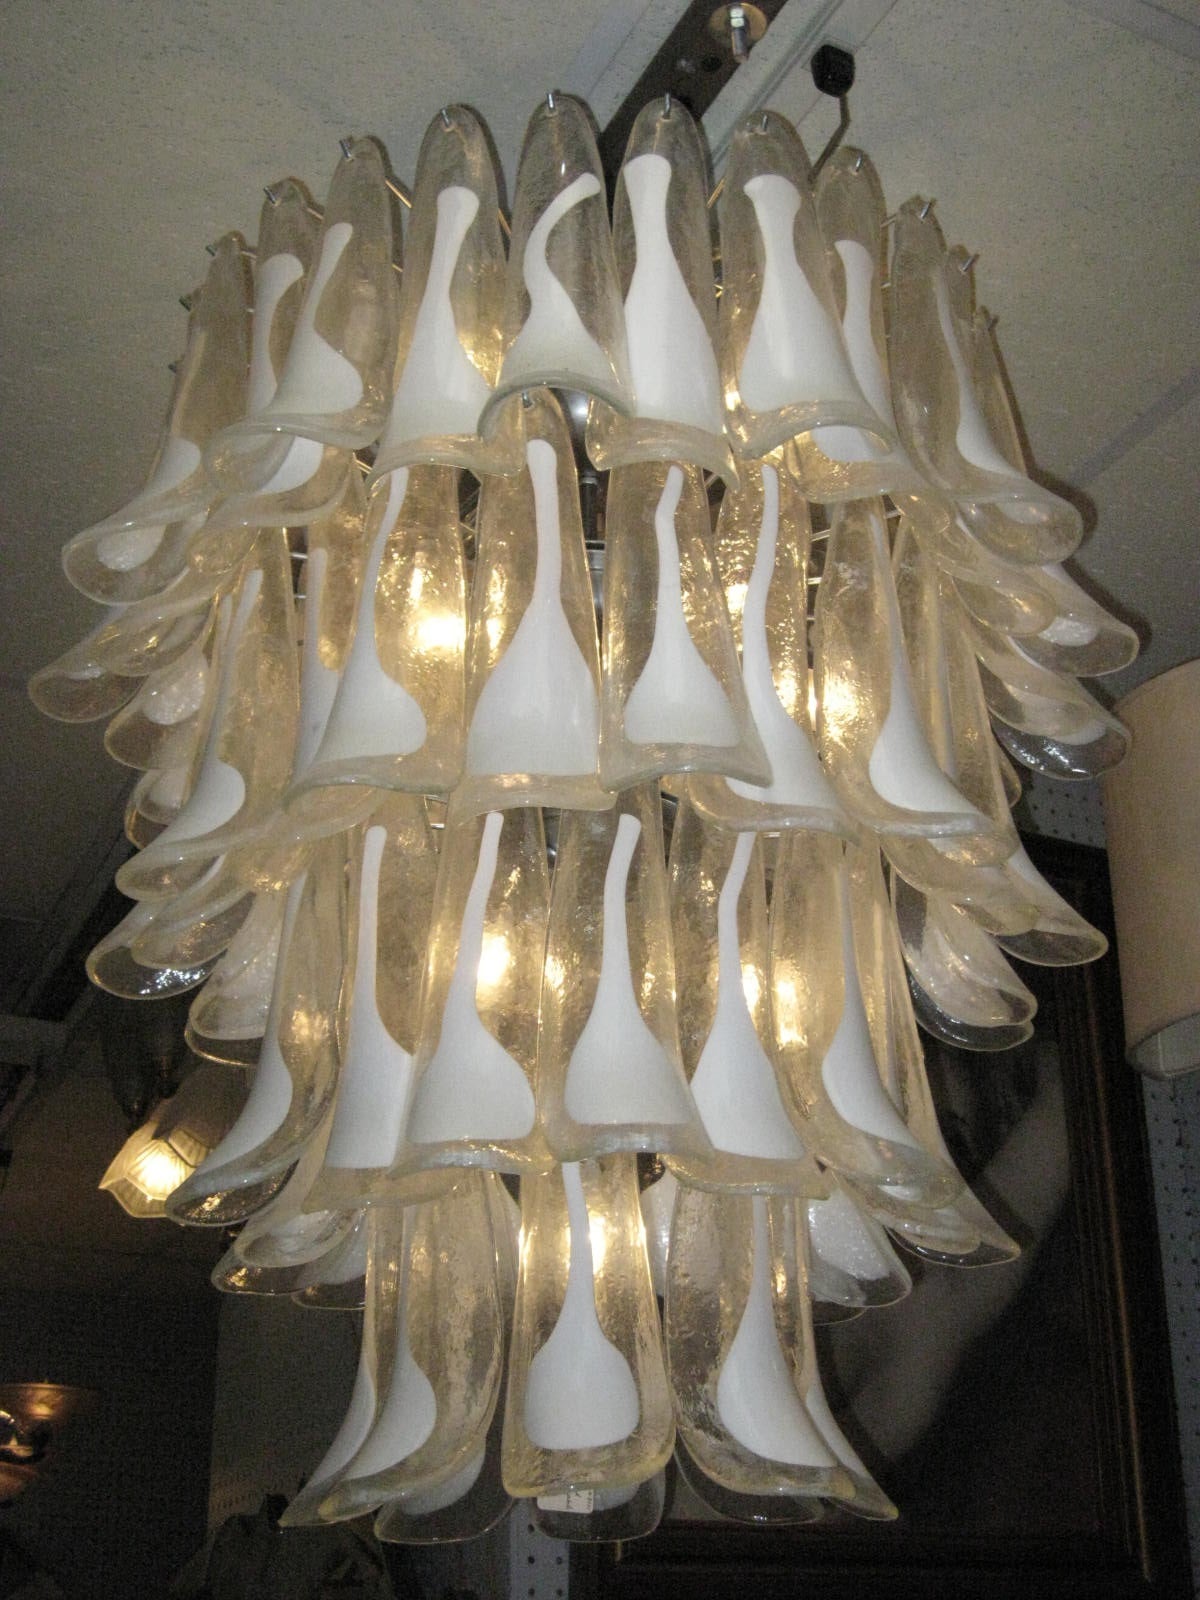 Large Italian Murano chandelier handblown with cascading tiers of calla lily shaped flowers. Each glass petal decorated with a hand-painted enameled splash of white over clear glass. The white lily symbolizing magnificent beauty and purity. 
Can be